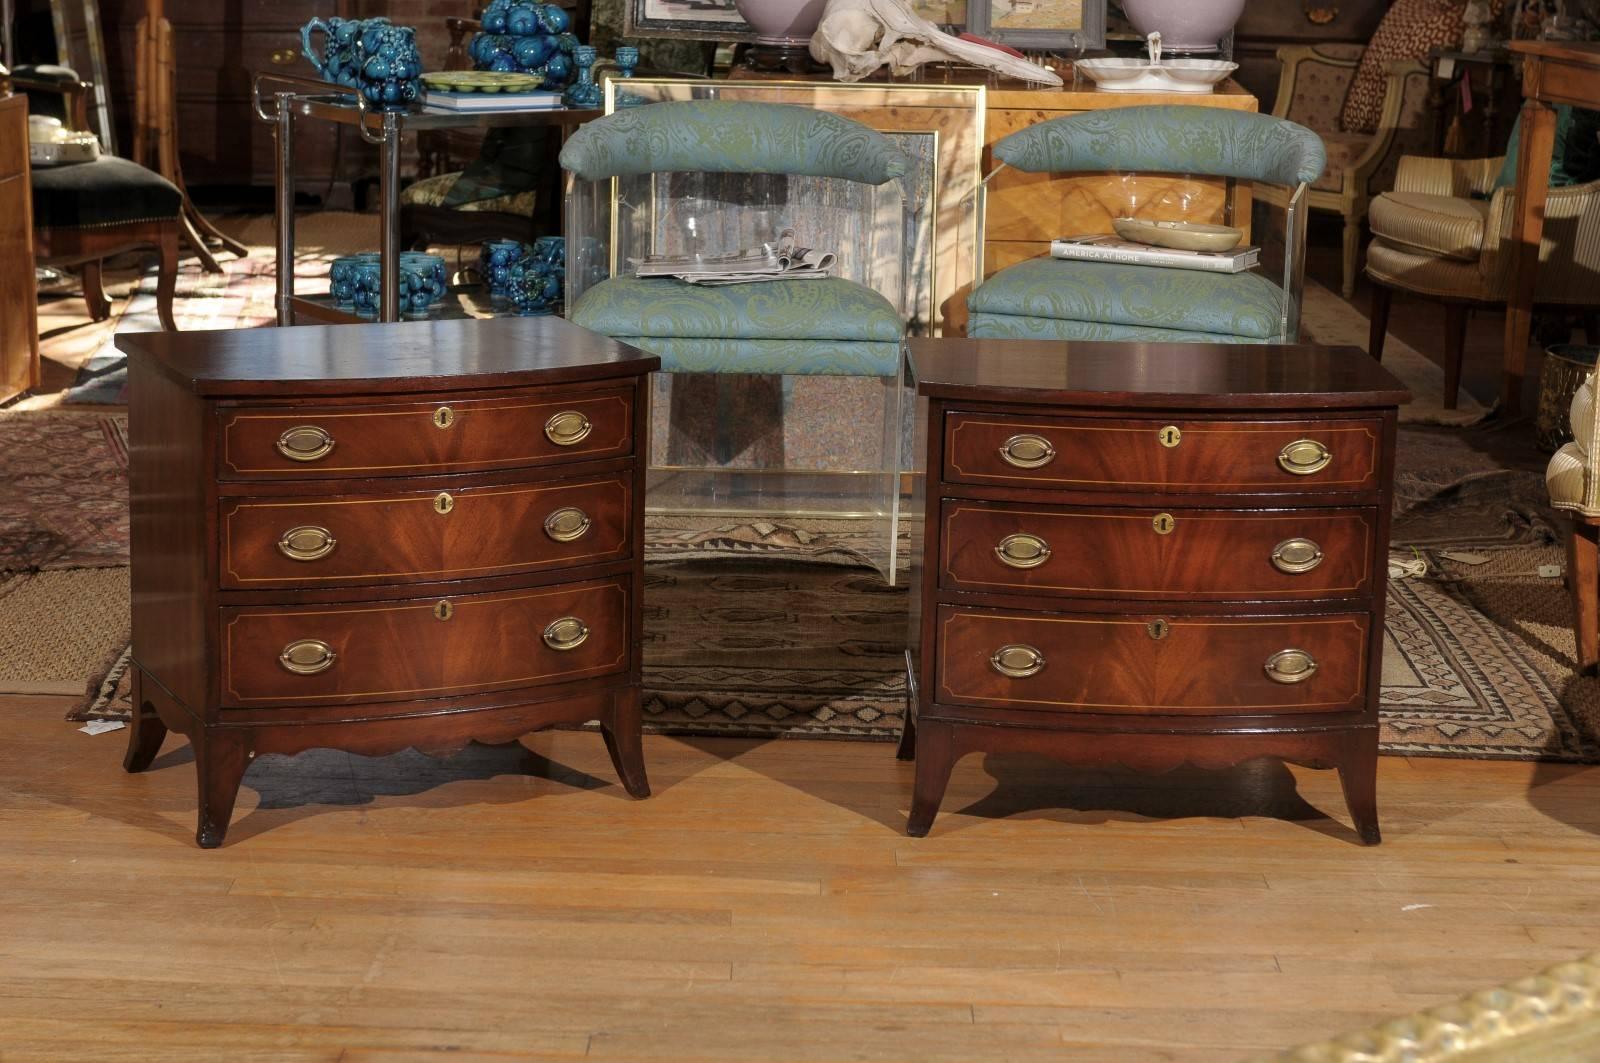 Pair of early 20th century American petite bow front chests in the Georgian style and made of flame mahogany having three graduated drawers with satinwood inlay and brass escutcheons and bail hardware.